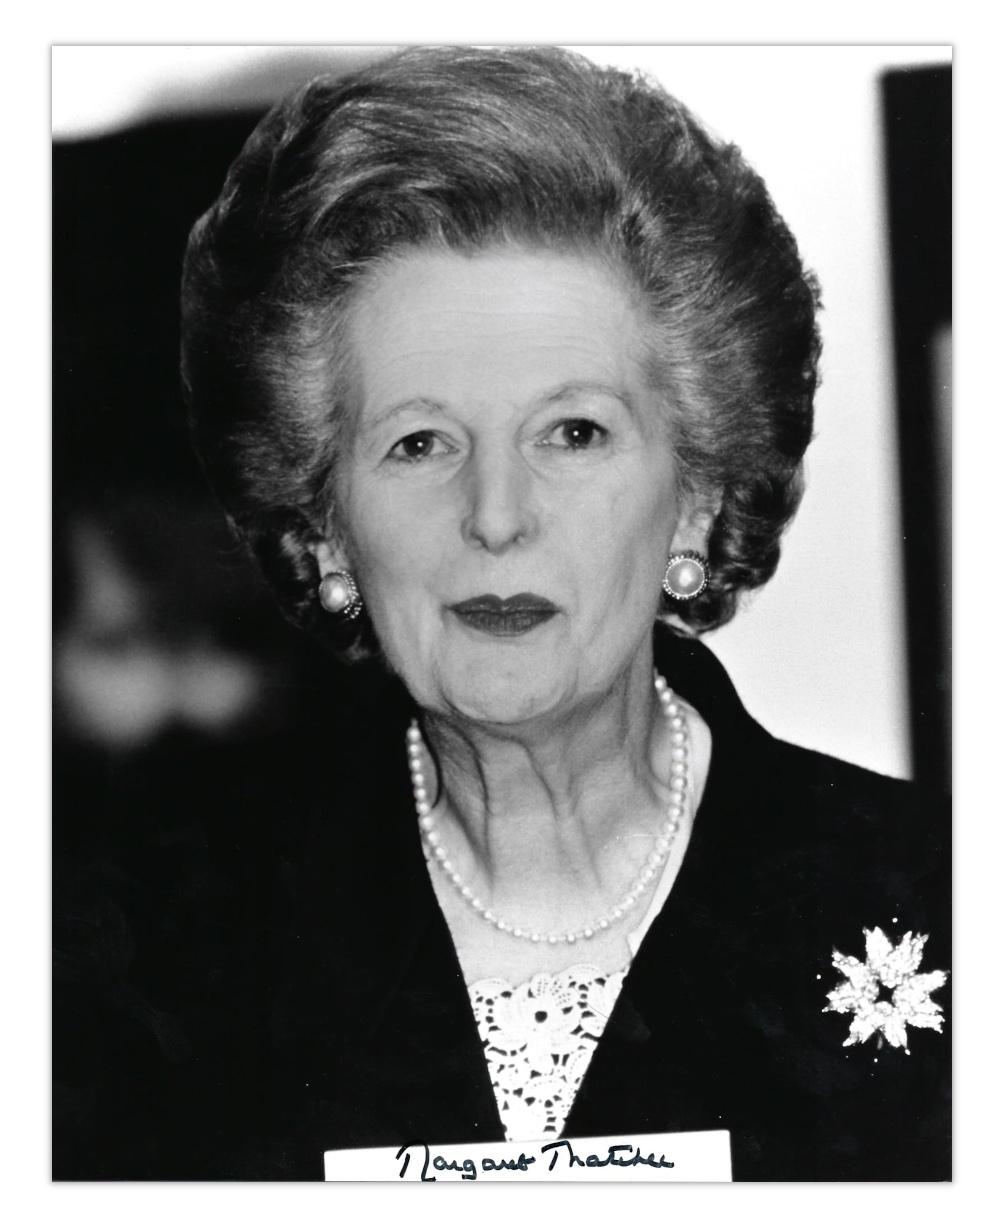 A signed black and white photograph of British prime minister Margaret Thatcher 
Margaret Thatcher (1925 - 2013) was the UK's first female prime minister. She served three consecutive terms in office, 1979-1990, and received the nickname 